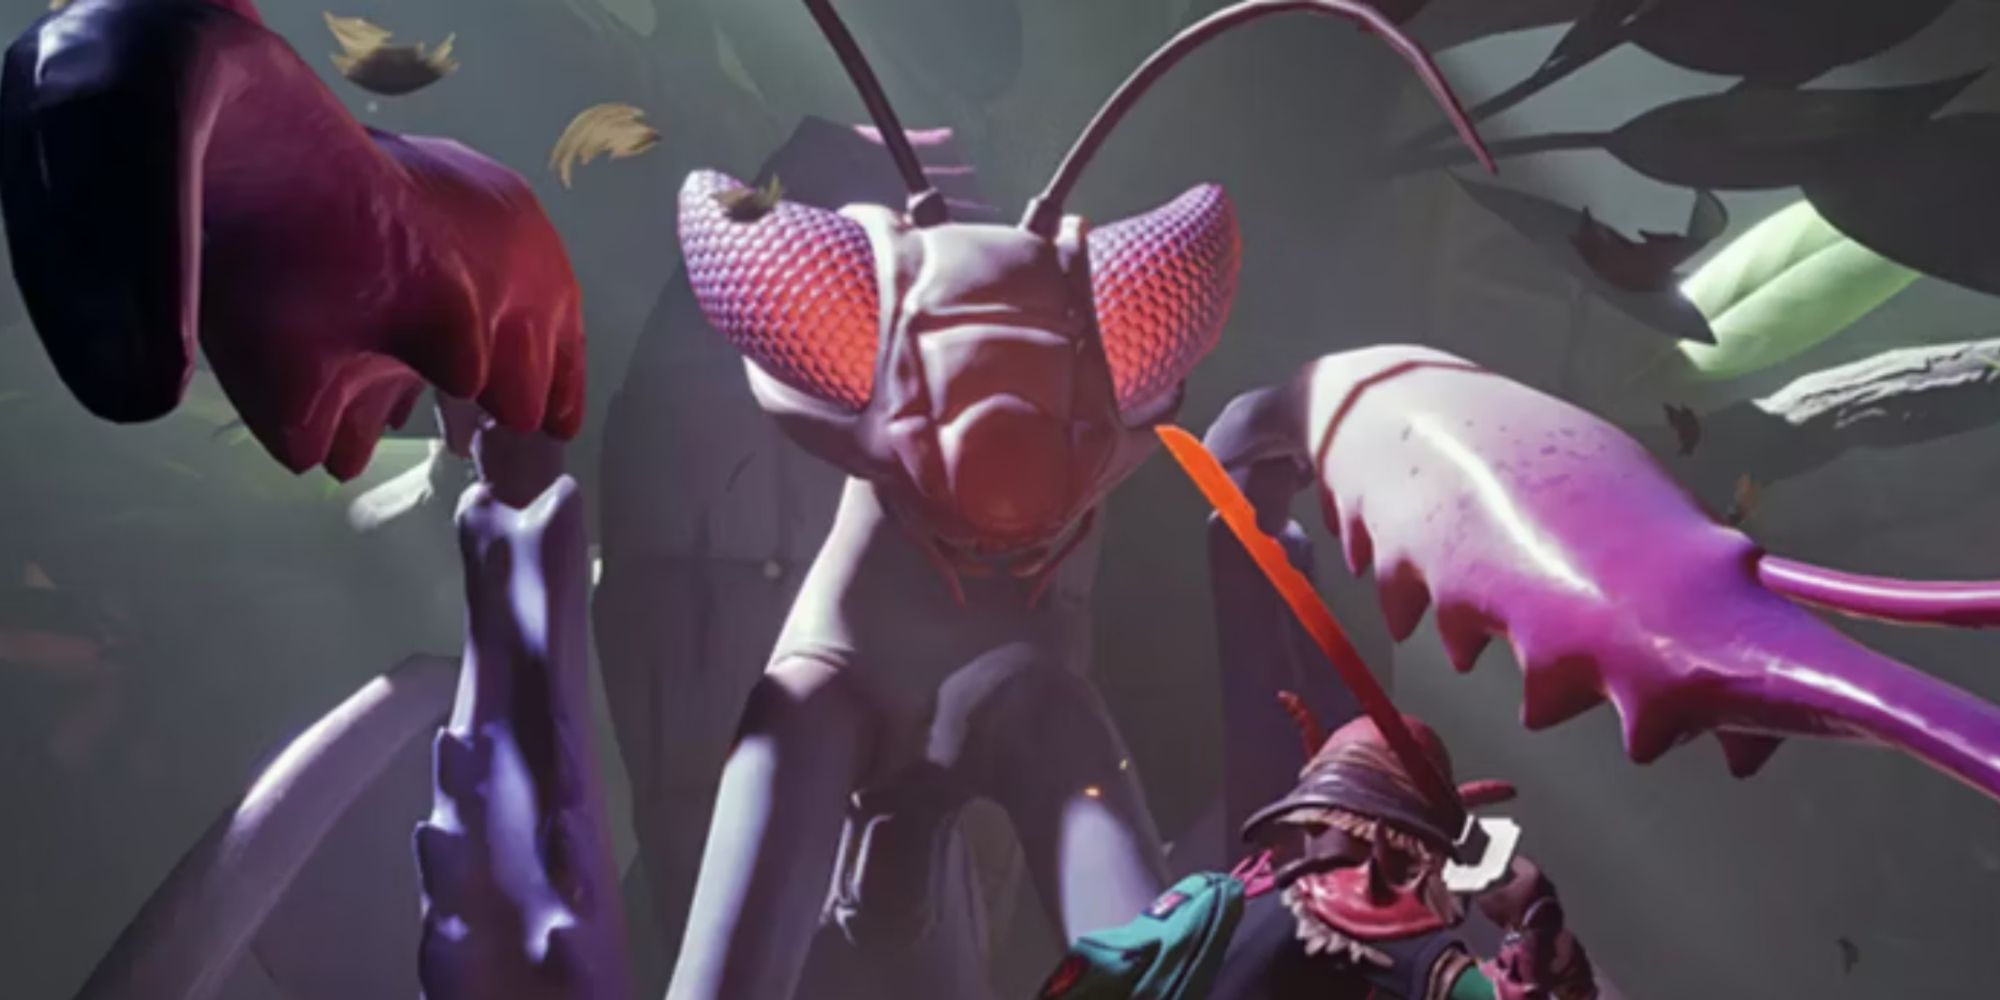 The Mantis Boss towers over the smaller main character.